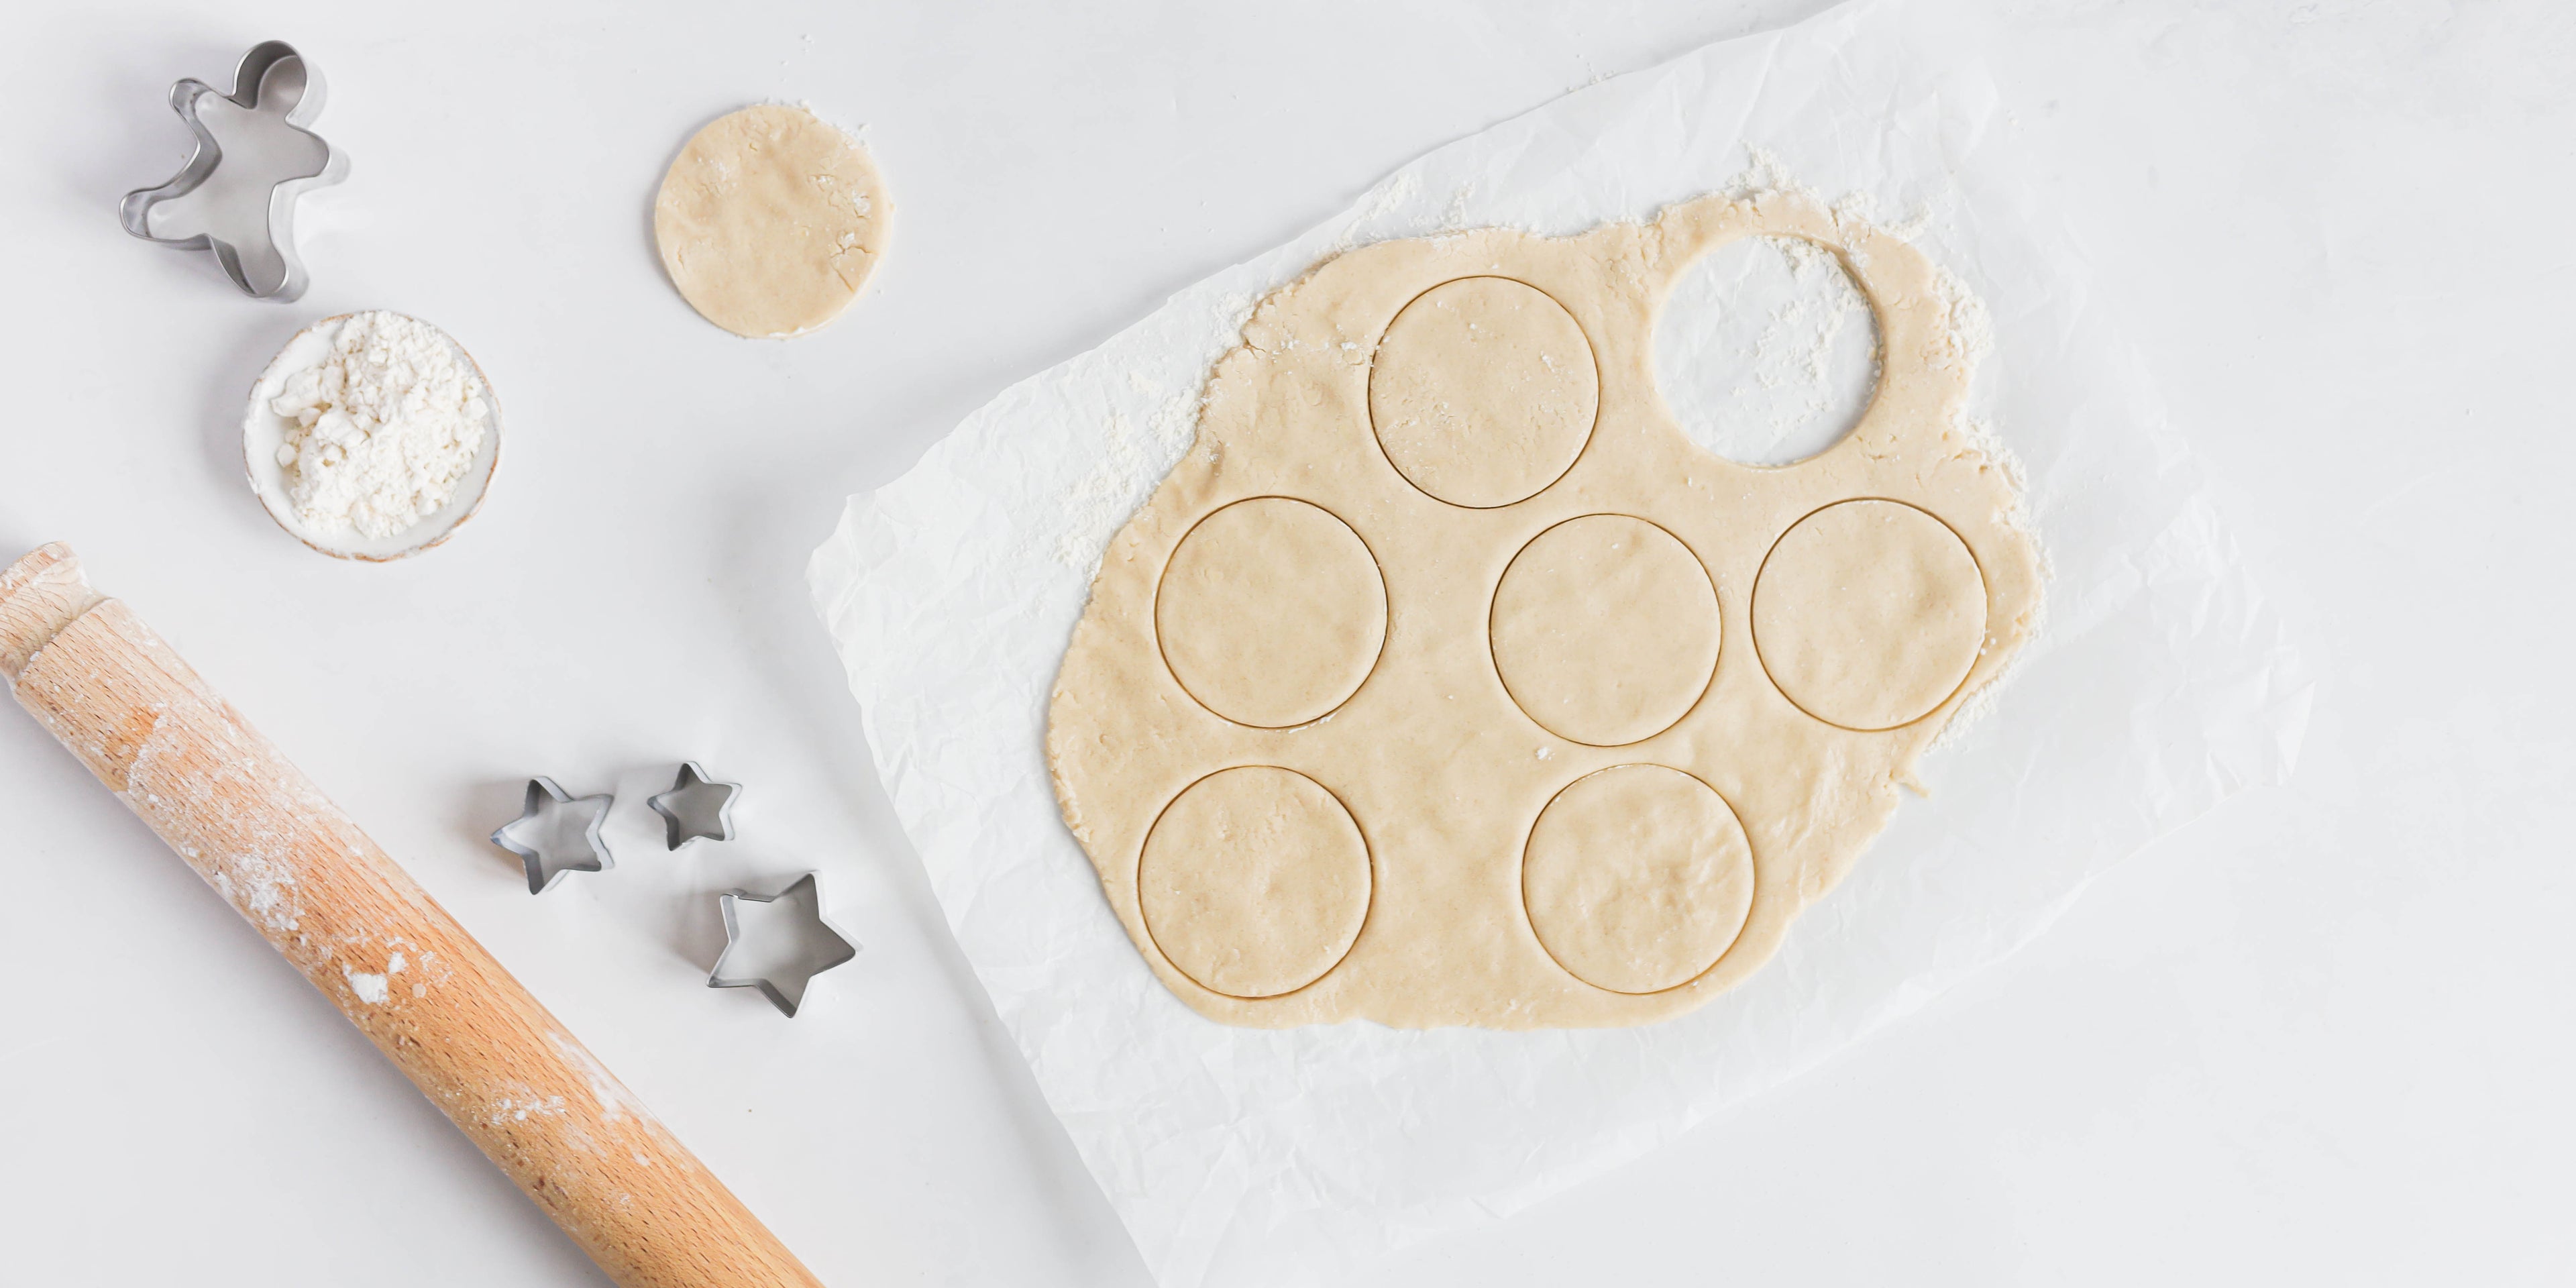 Vegan dough rolled out with circles cut out of it